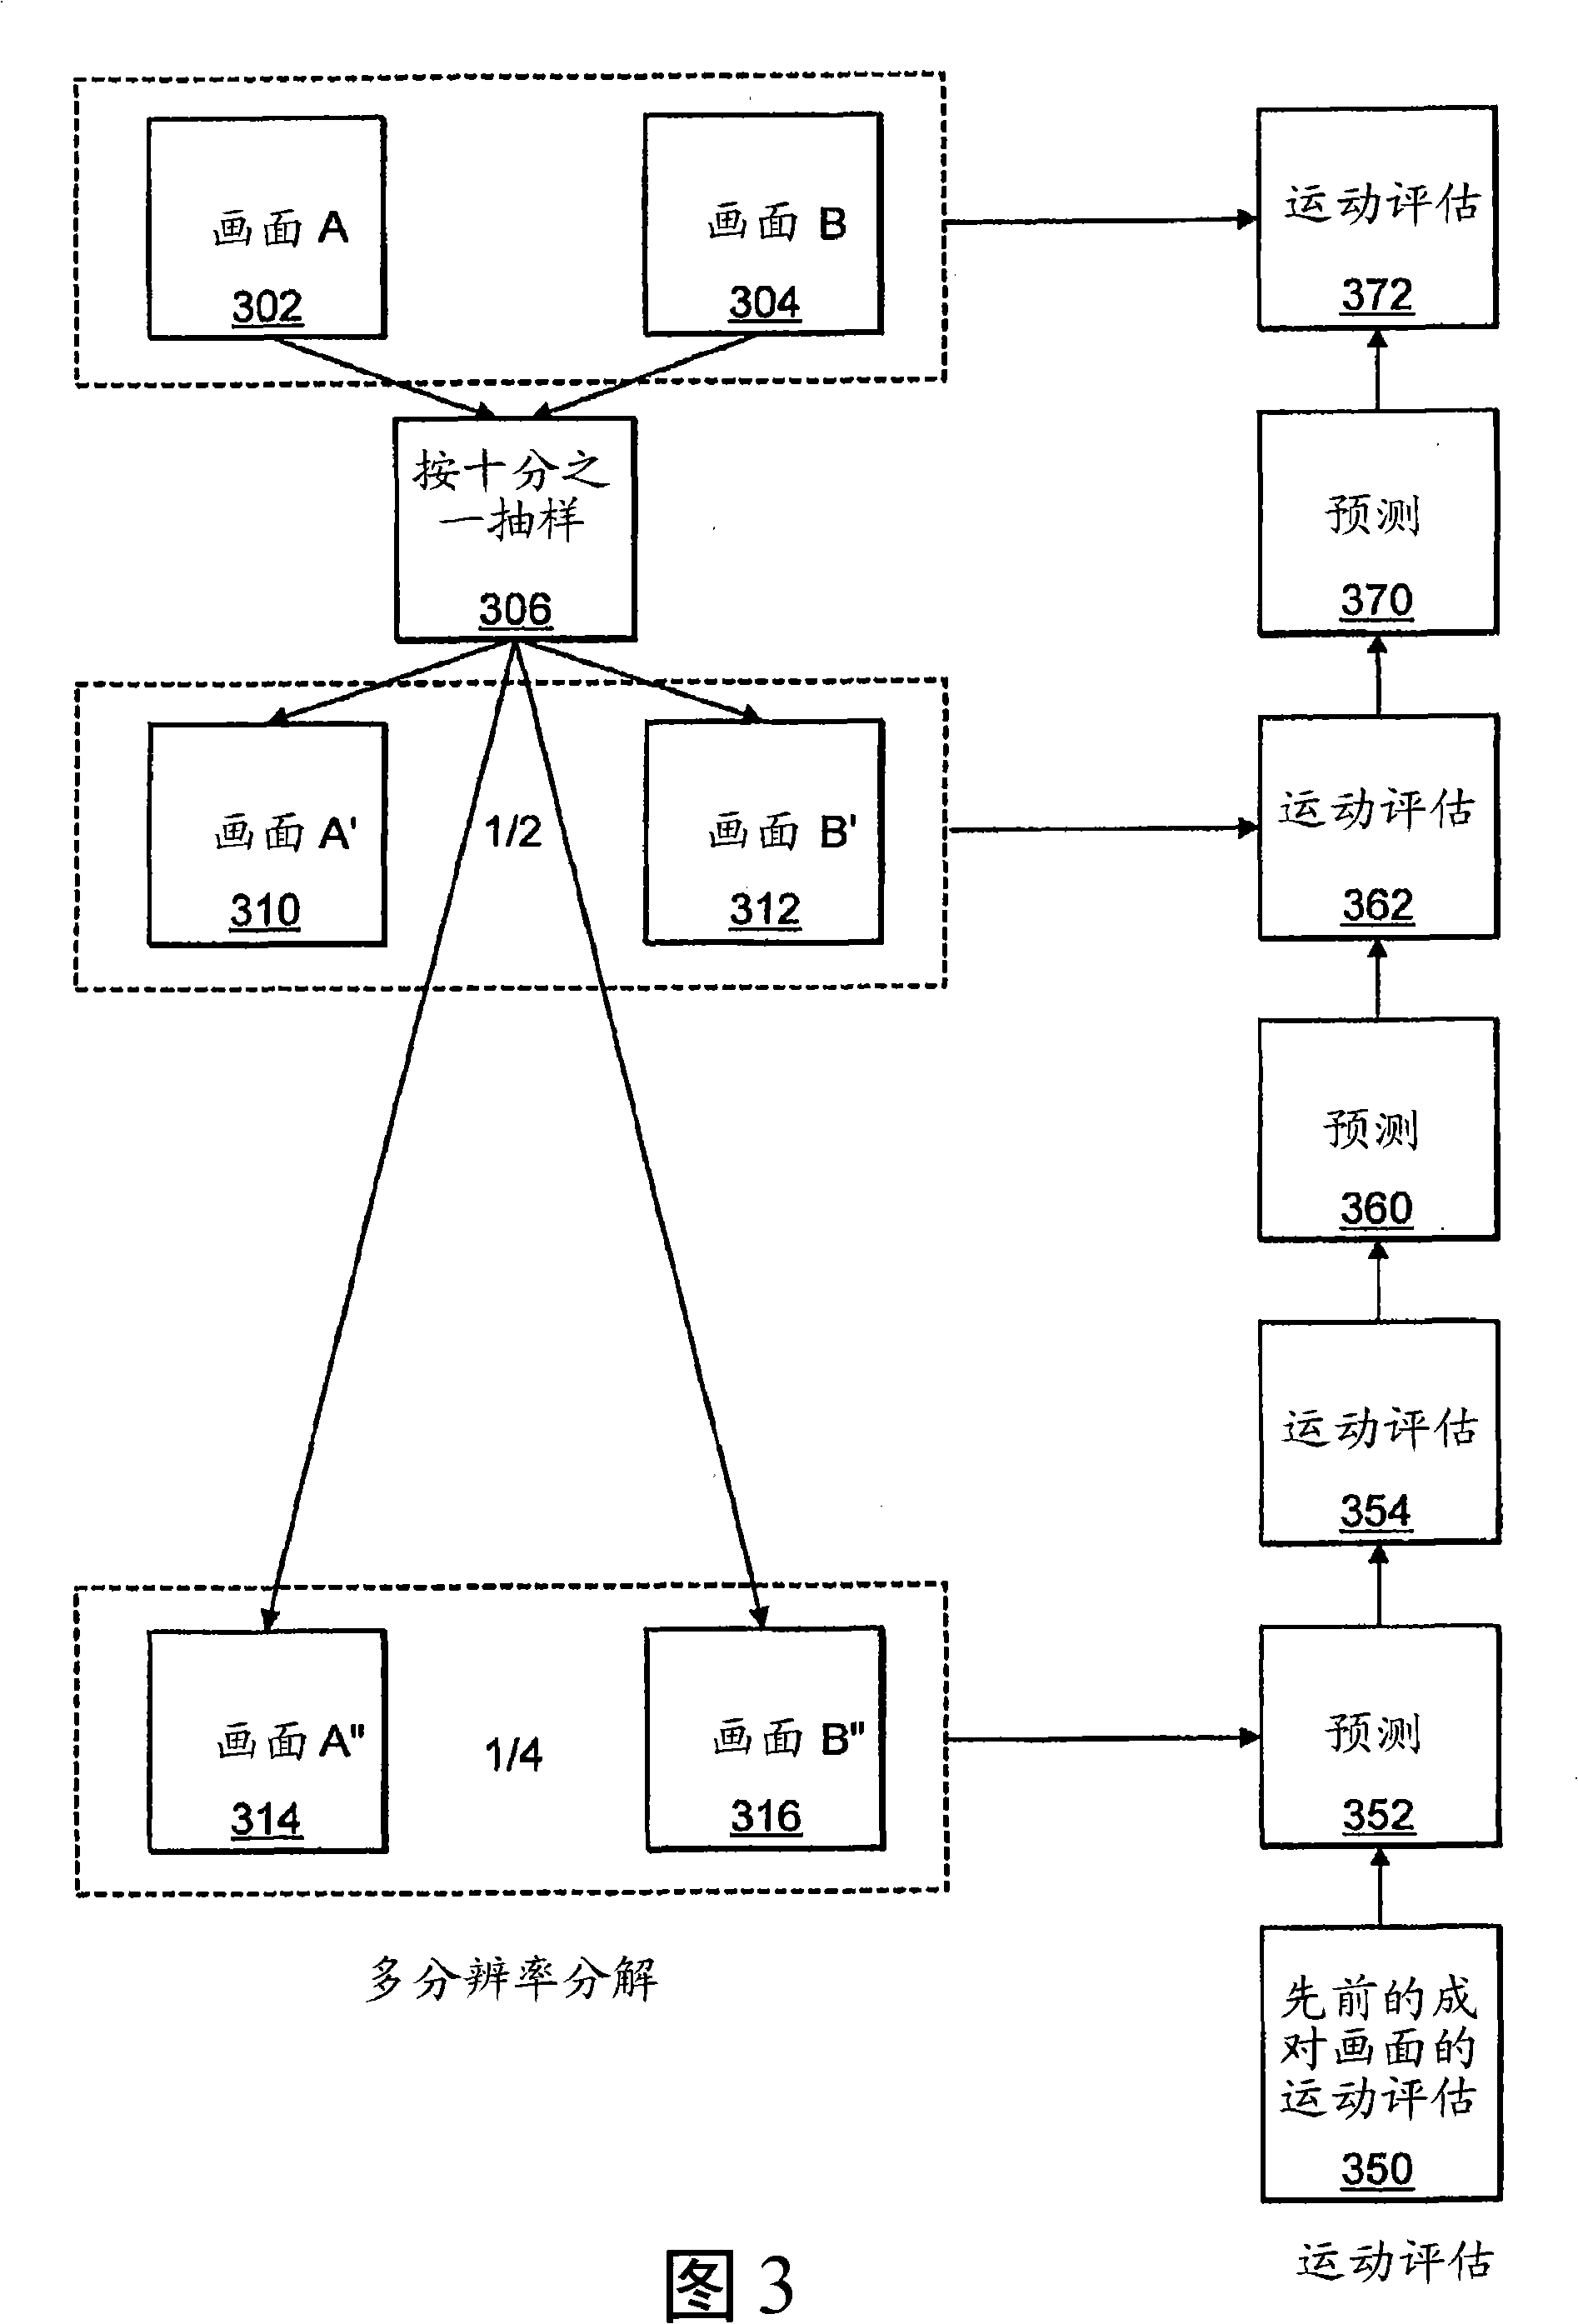 Apparatus and method for processing video data